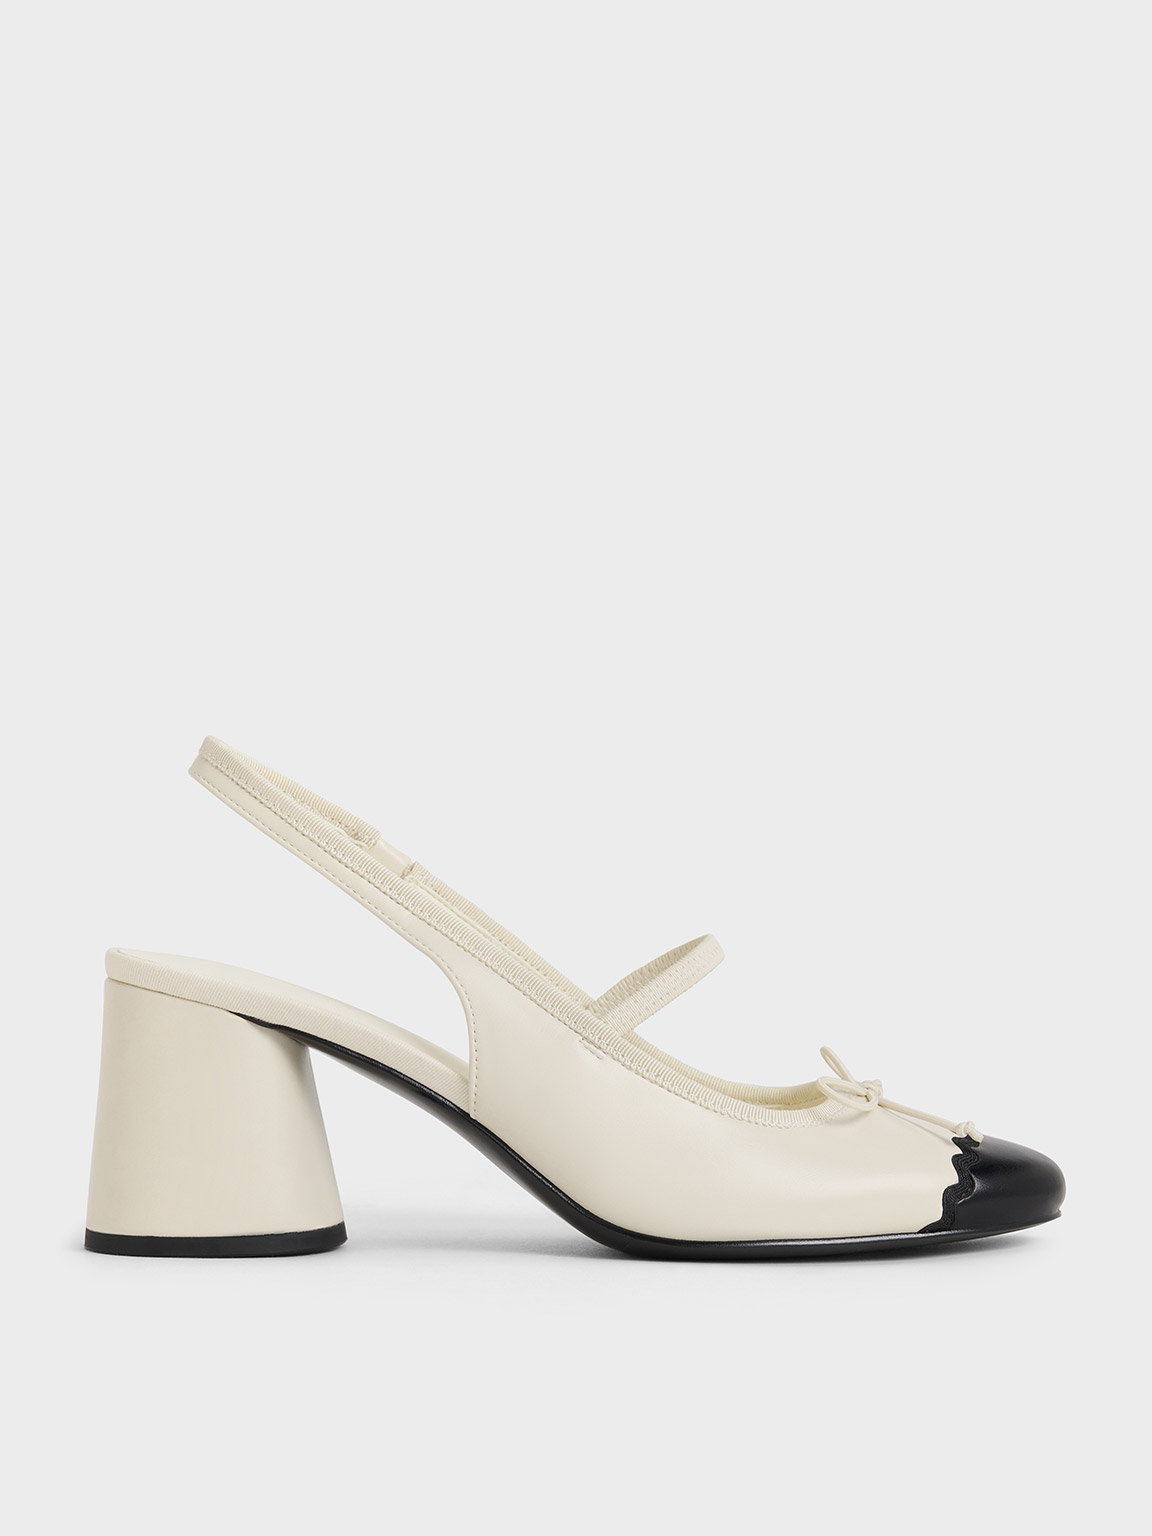 Charles & Keith Two-tone Bow Slingback Pumps In Cream